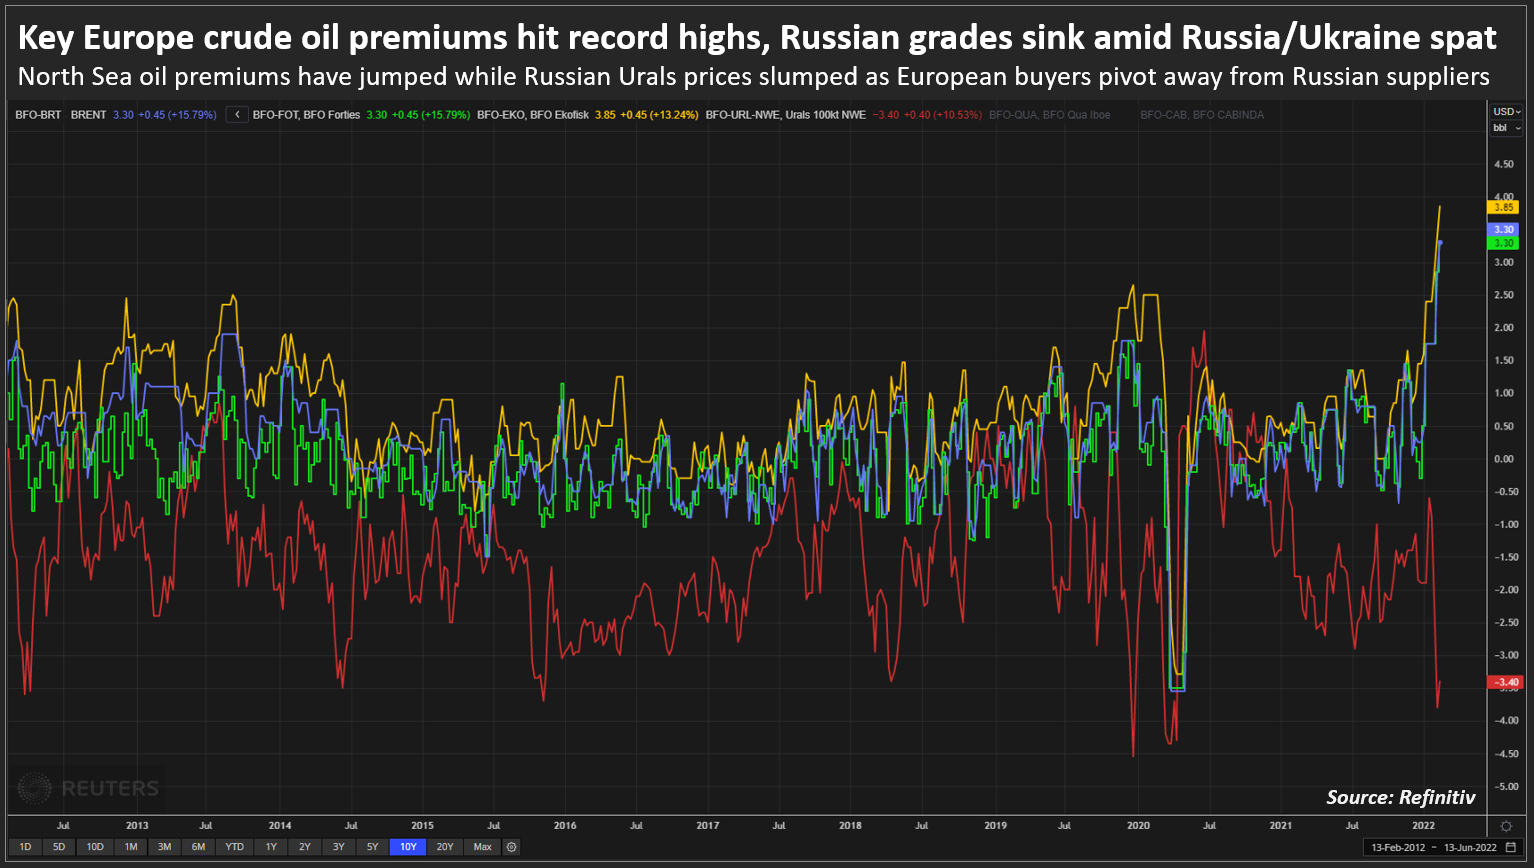 Key Europe crude oil premiums hit record highs, Russian grades sink amid Russia/Ukraine spat